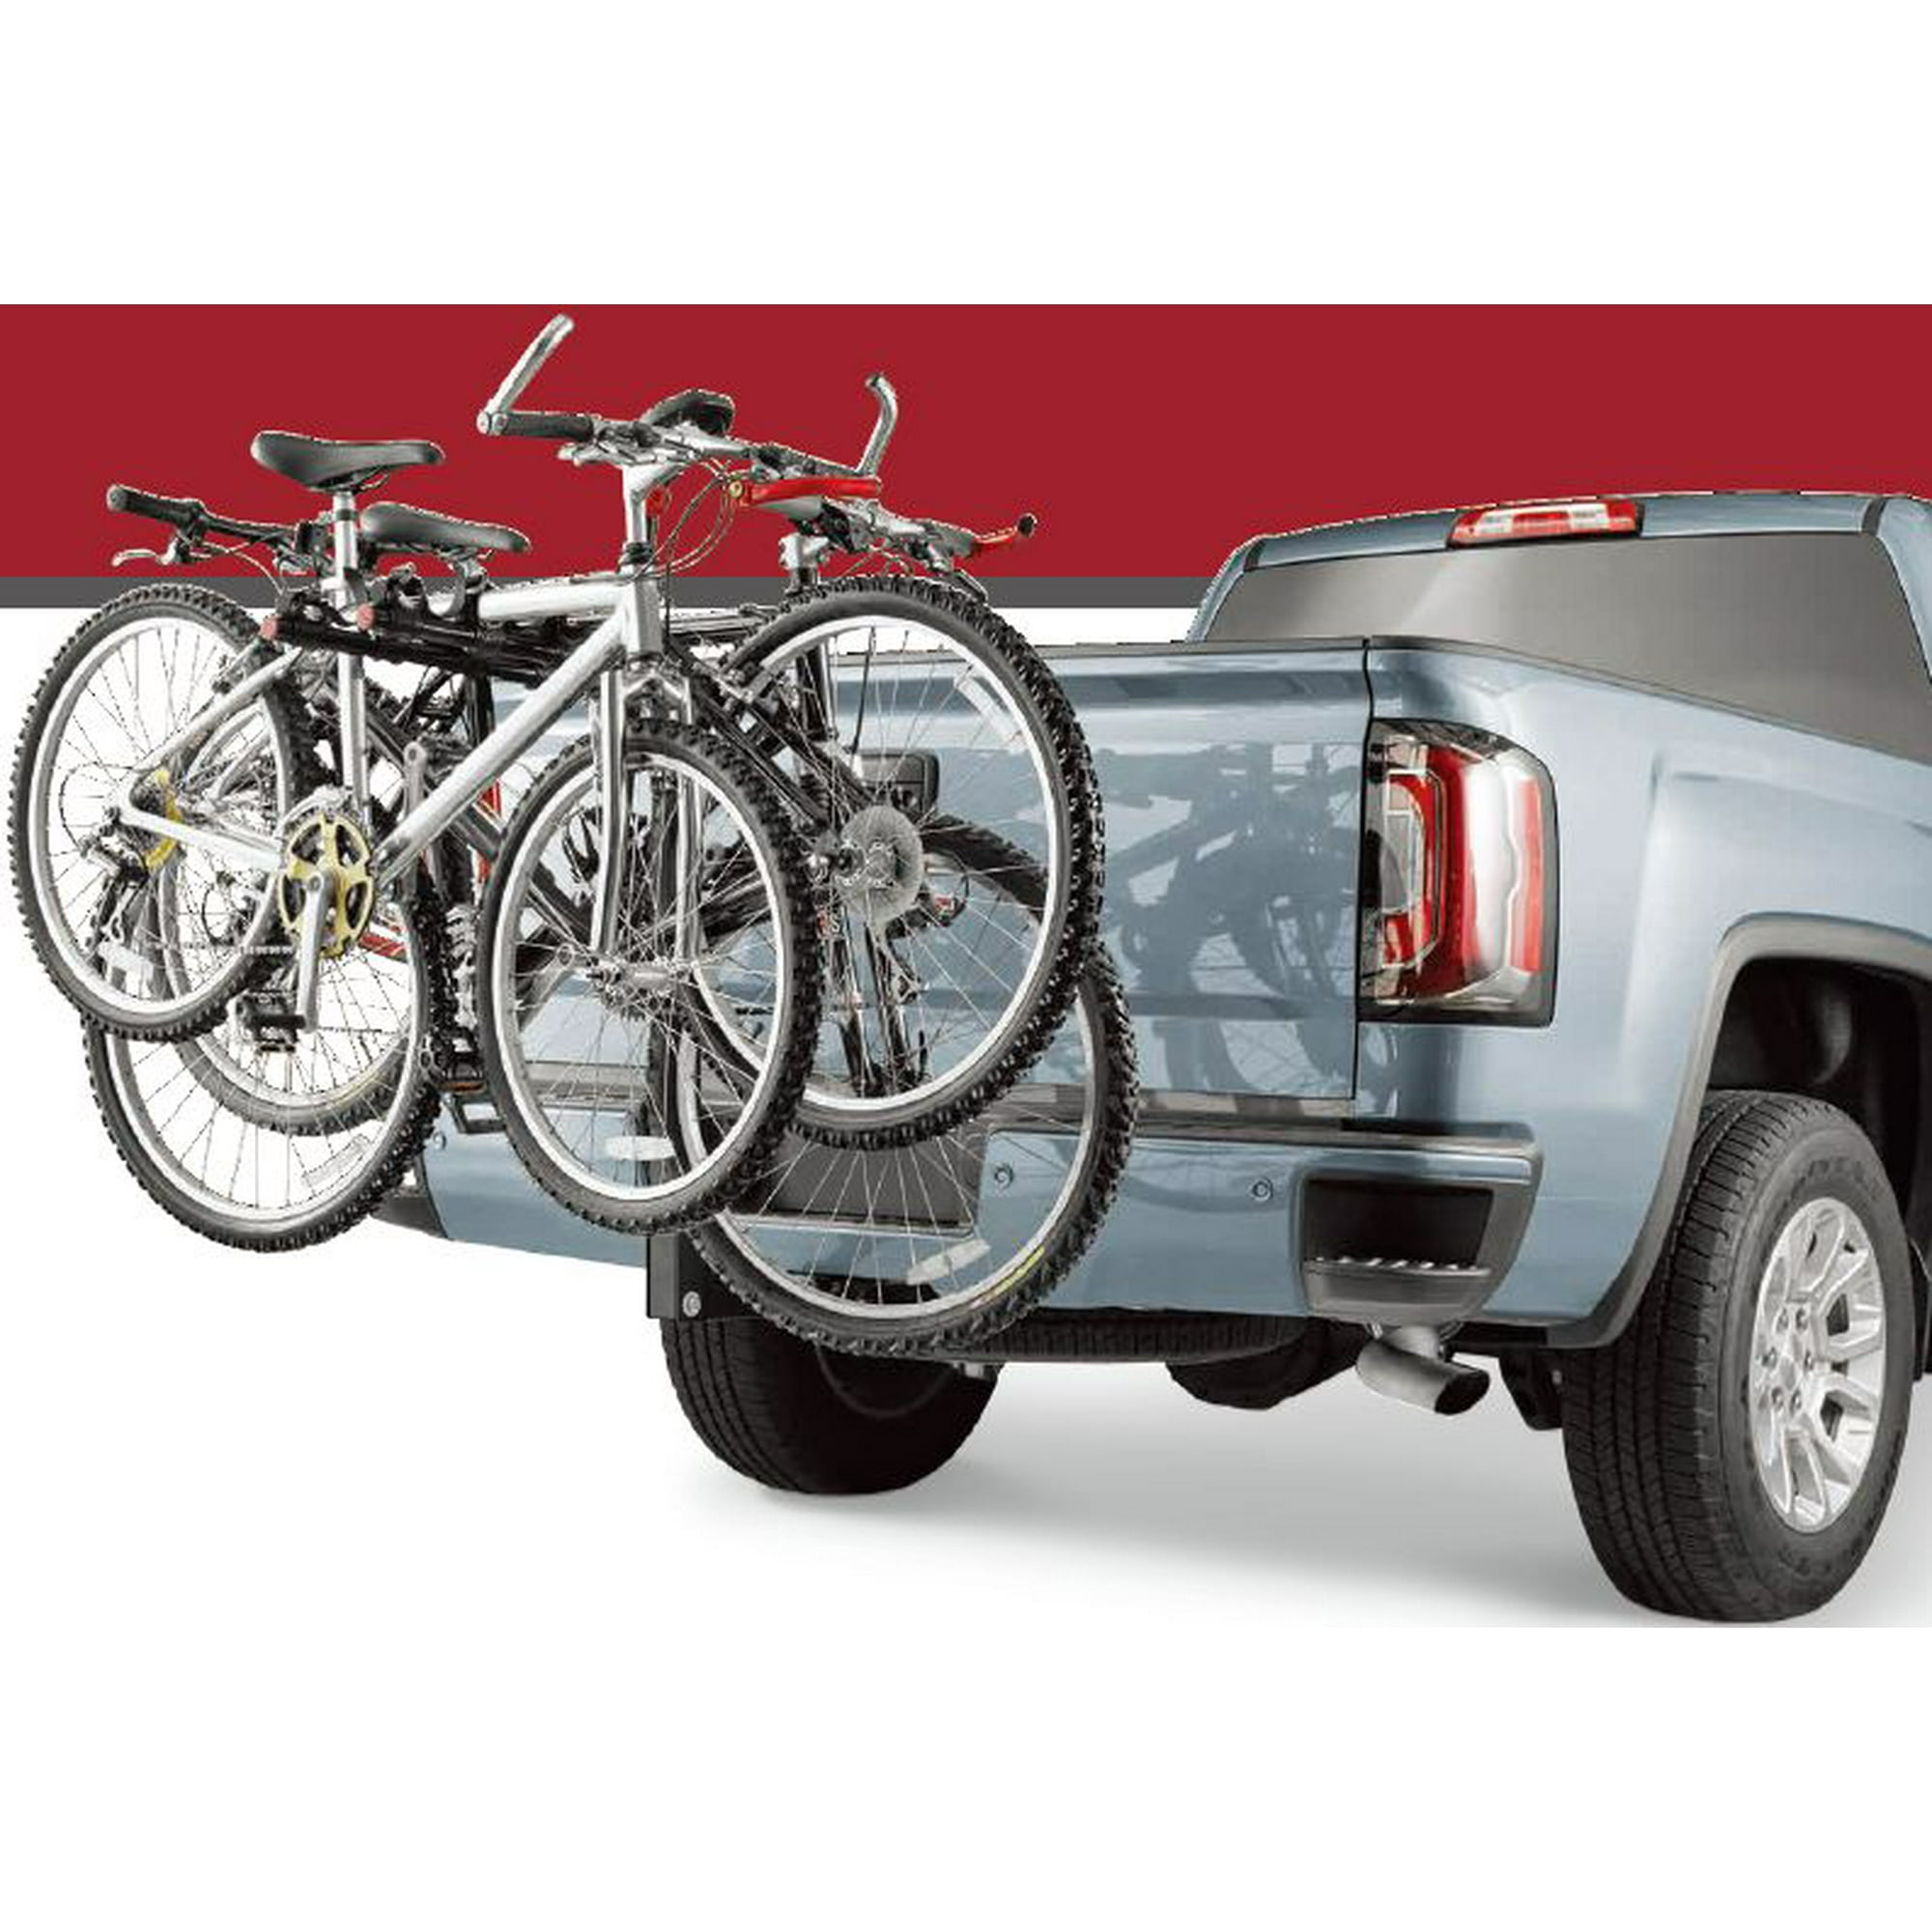 CargoMaster Bike Carrier- Hitch Mounted, 4-bike Carrier 